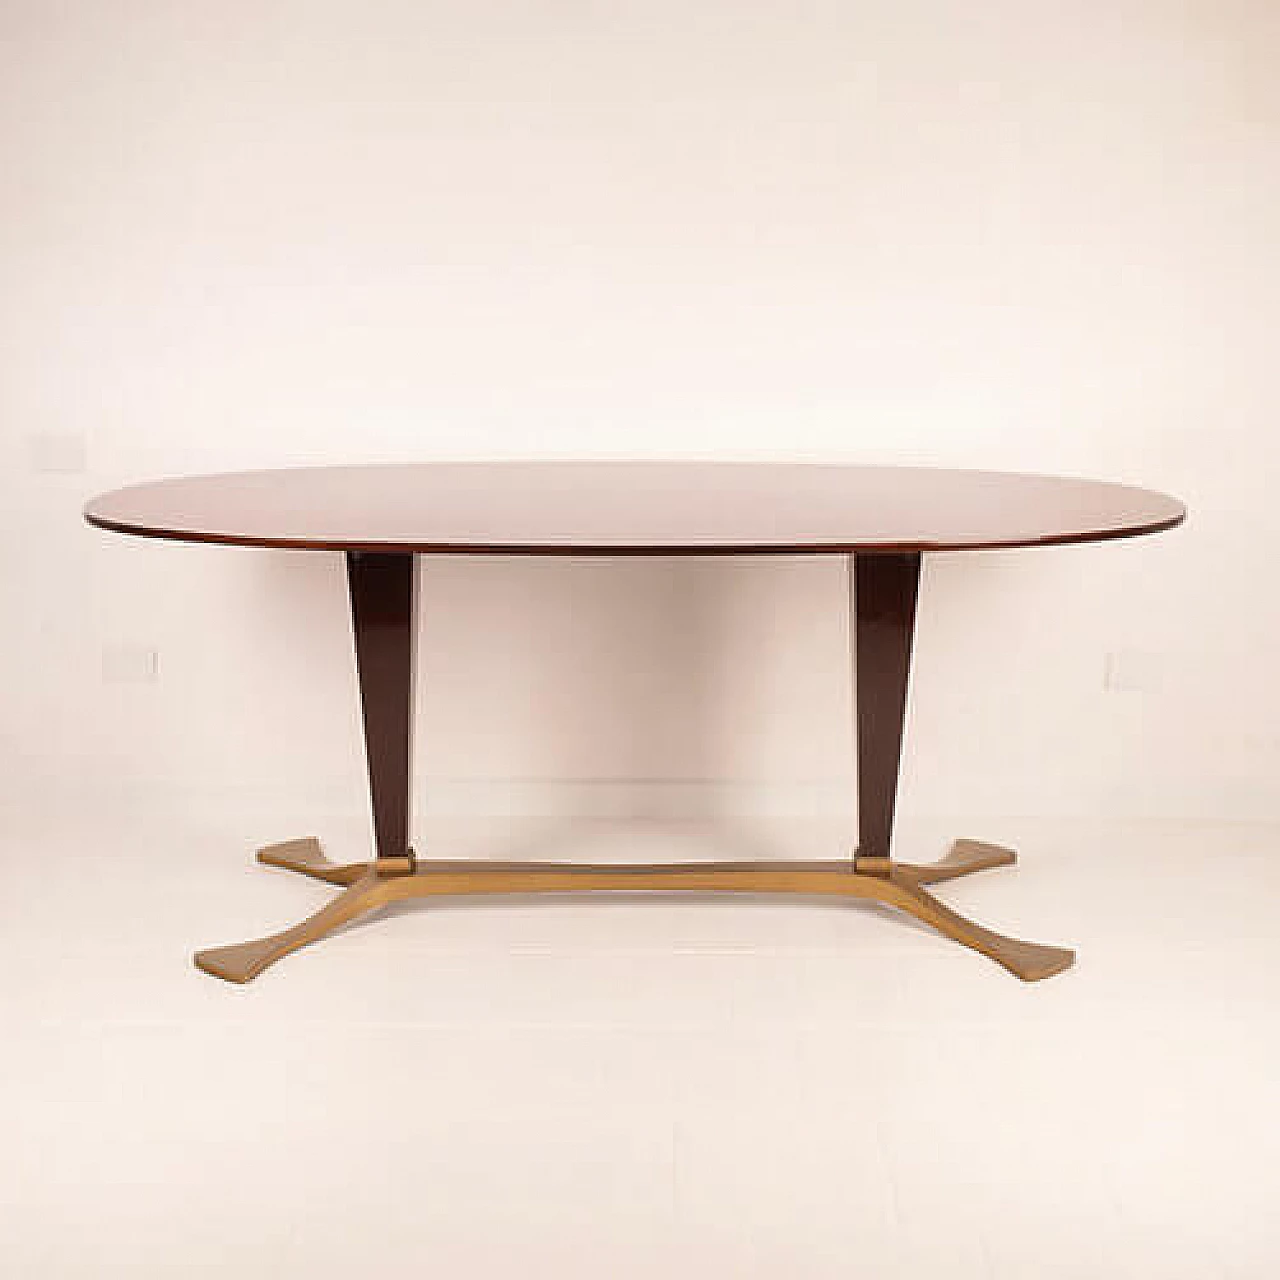 Mahogany feather table by Fulvio Brembilla for RB Design, 1950s 2